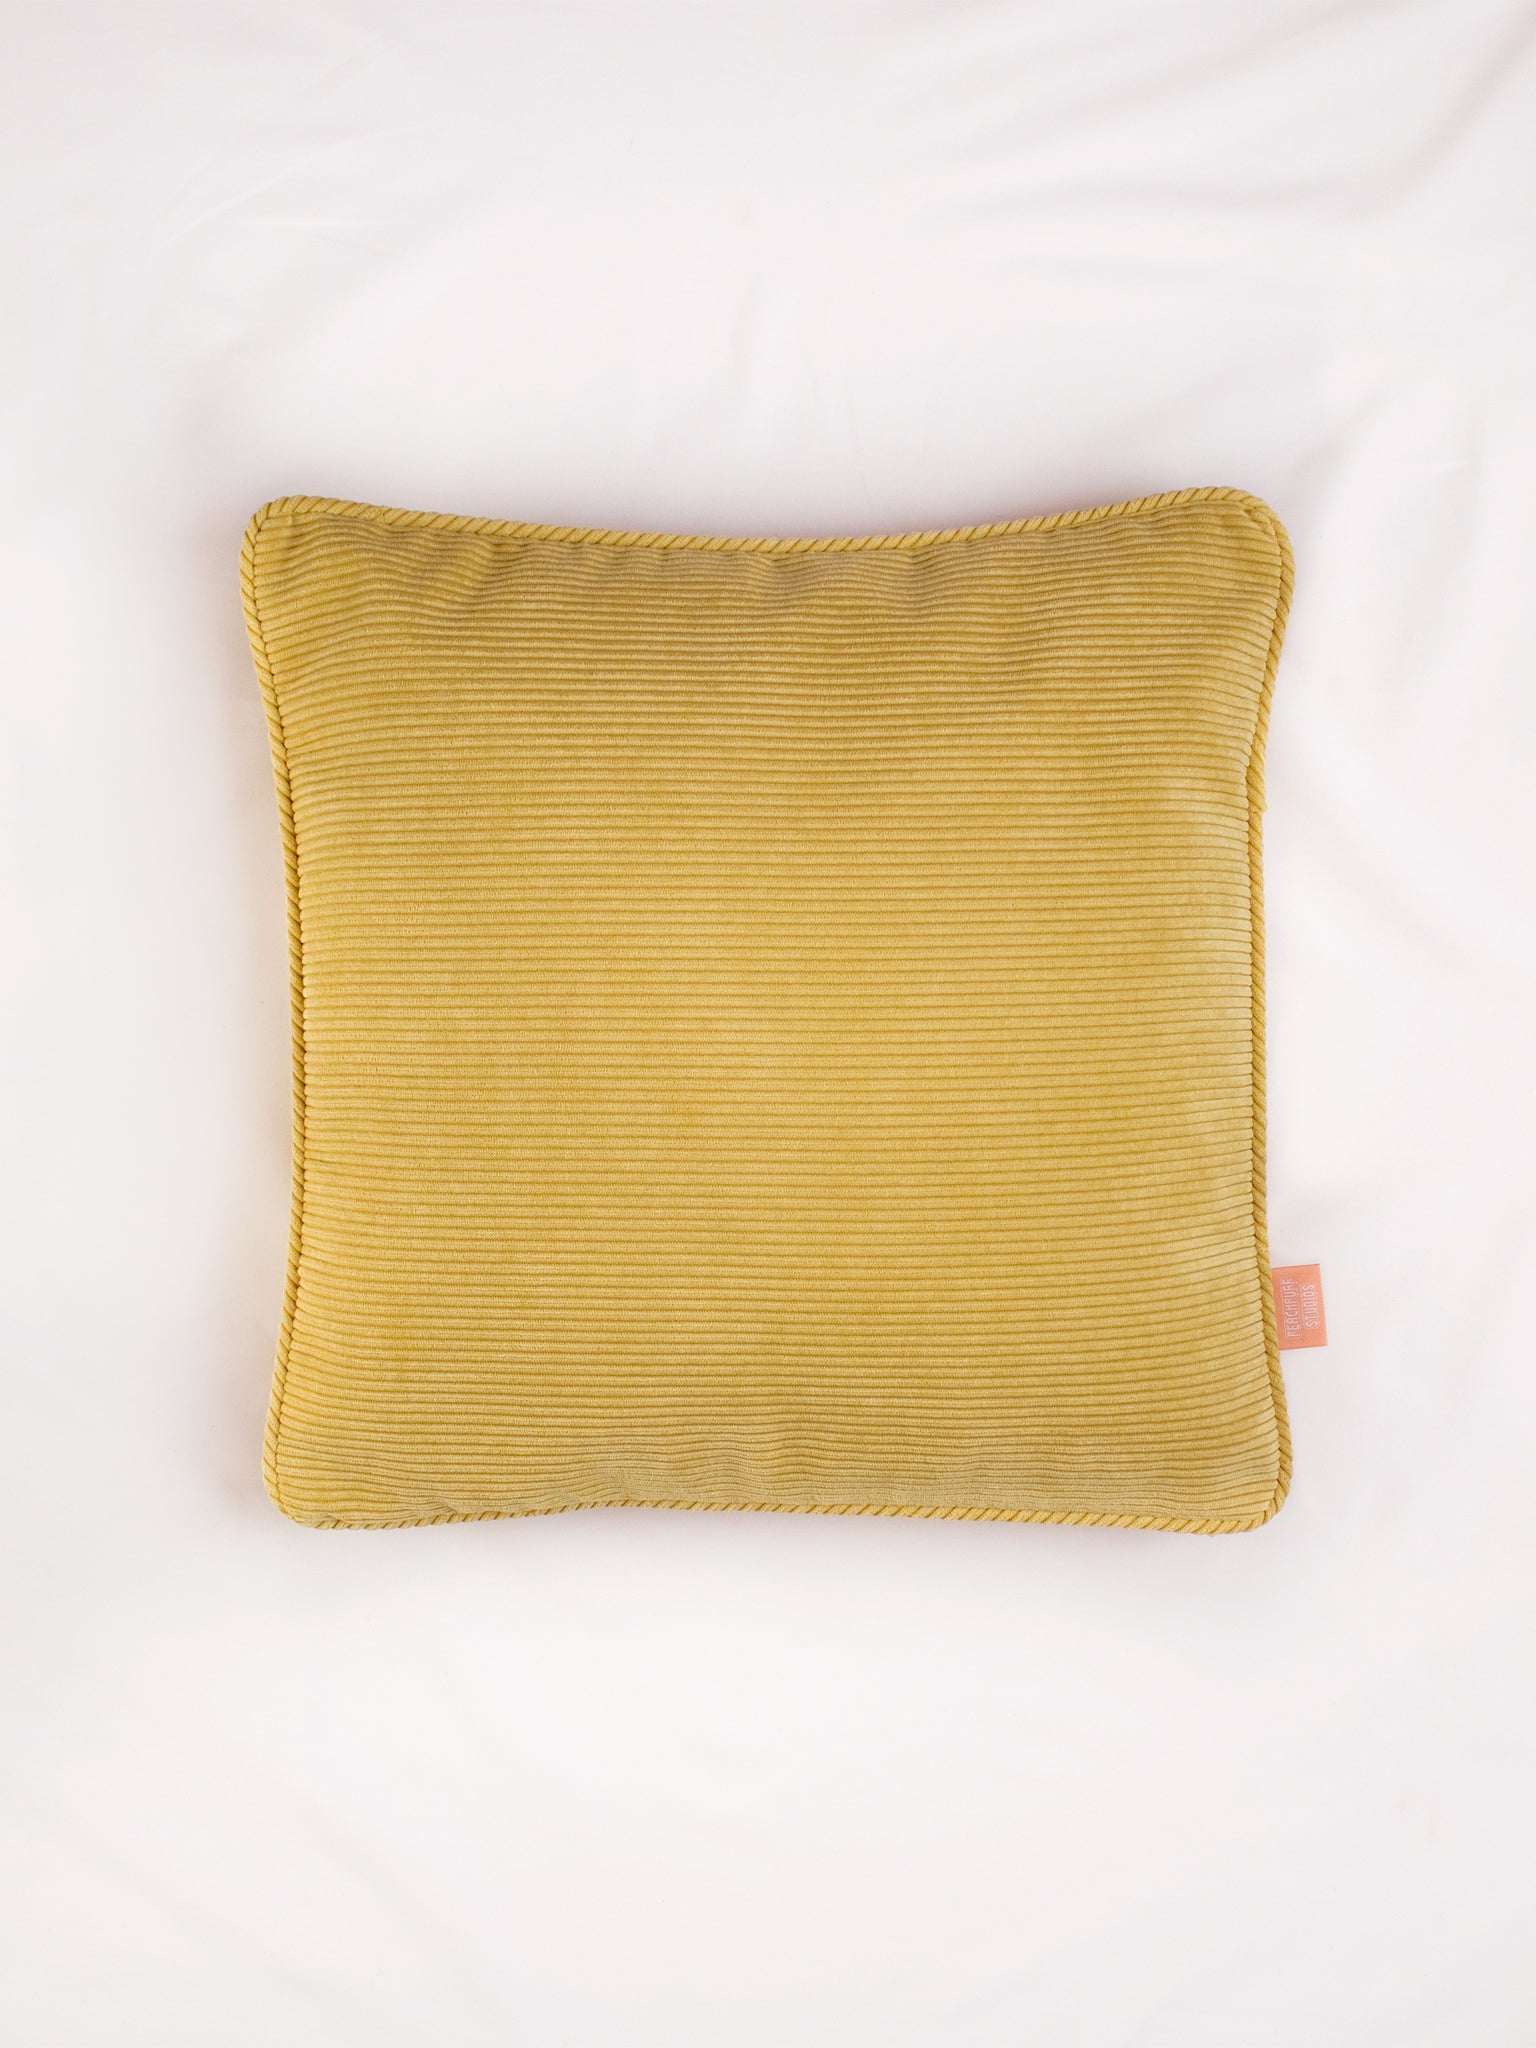 A yellow corduroy cushion on the centre of a white bedsheet 